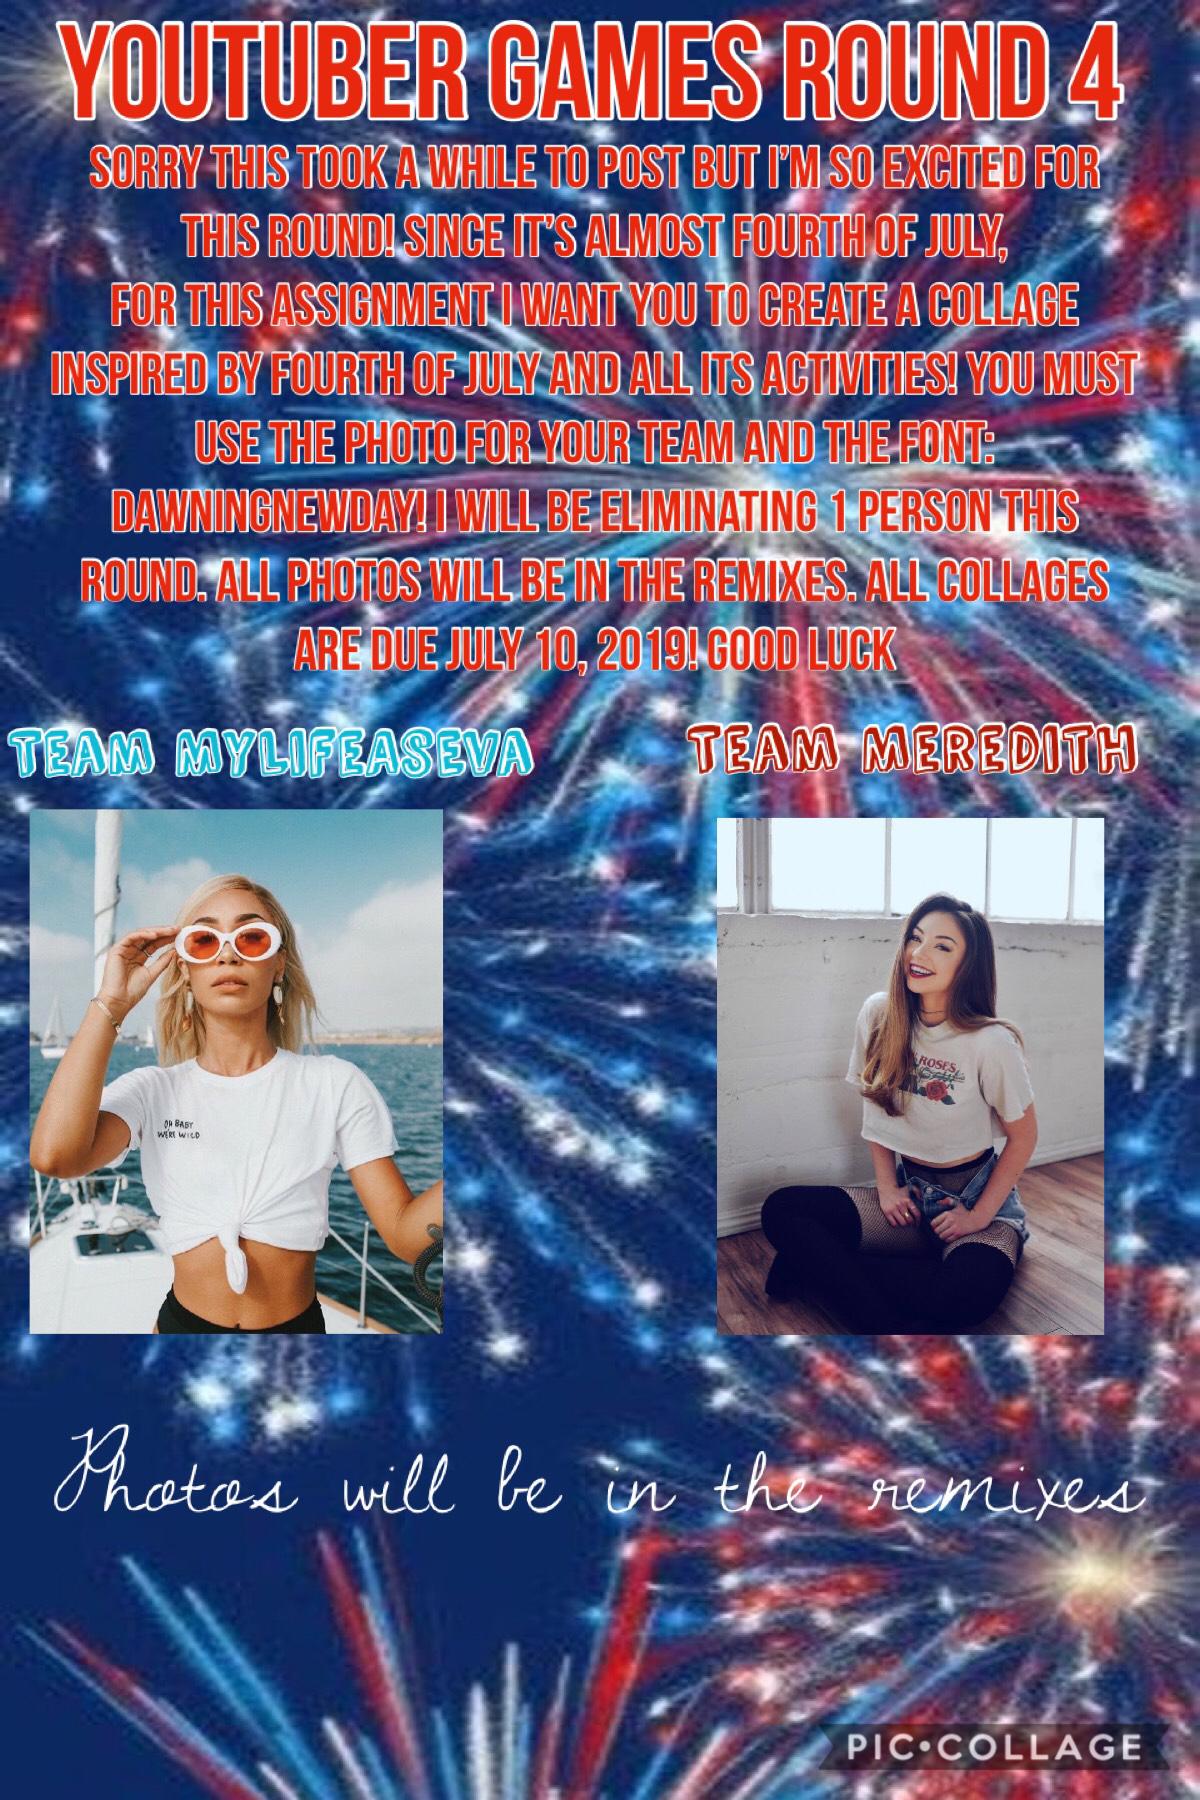 YouTuber Games Round 4! Due July 10, 2019! Good Luck! Full photo will be in the remixes! So excited to see what y’all come up with! 🔴⚪️🔵